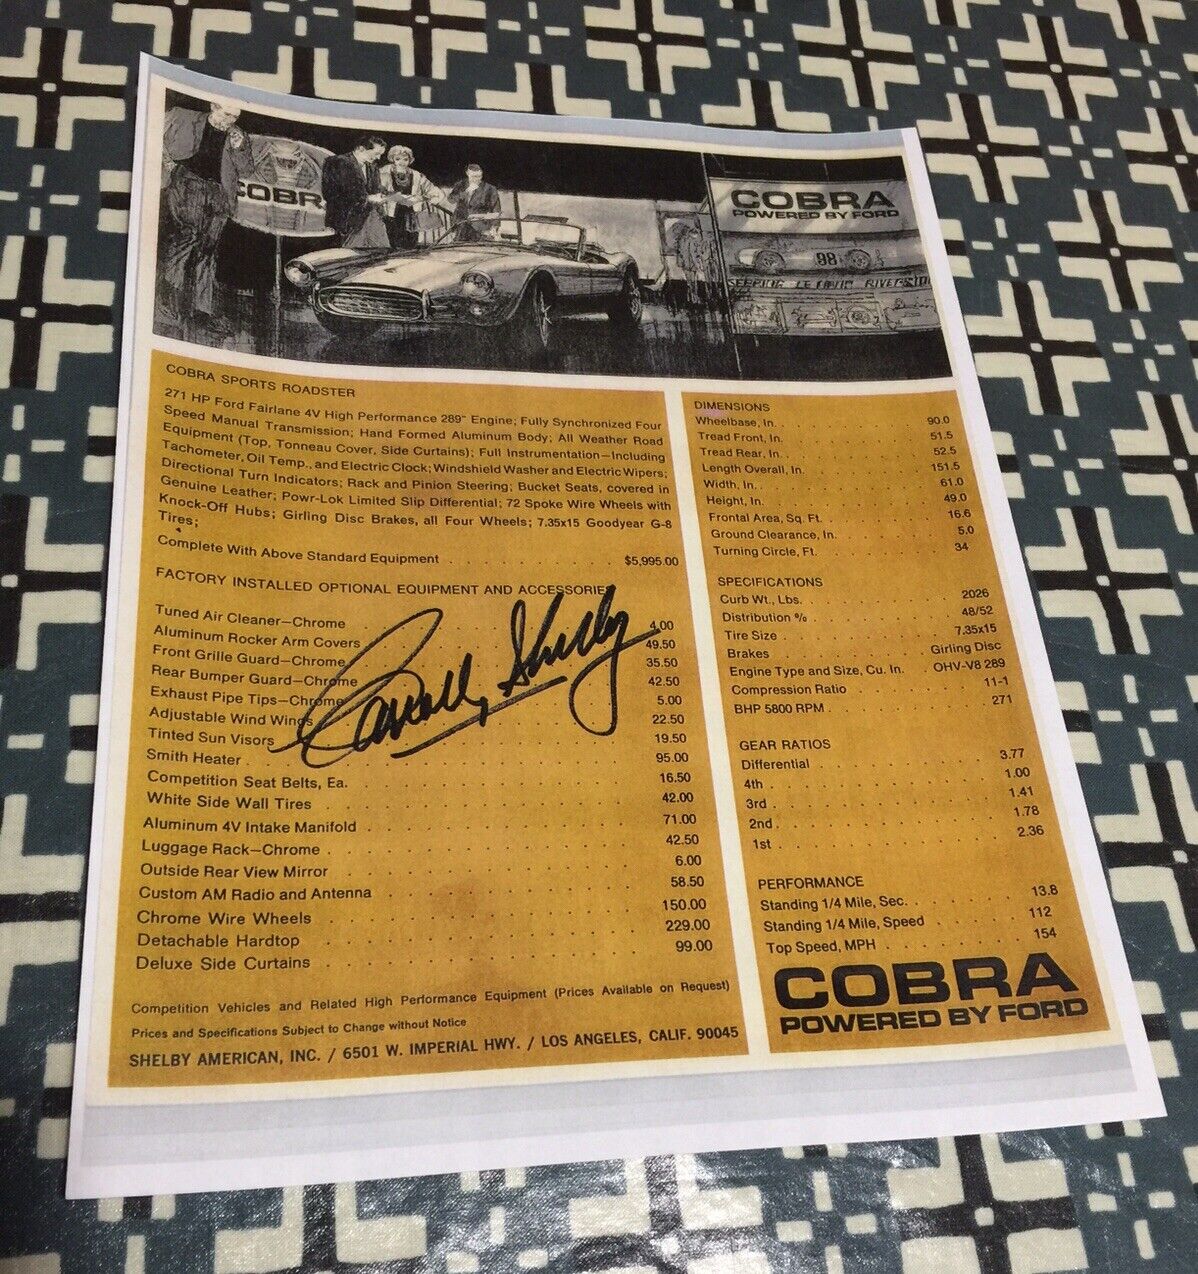 CARROLL SHELBY SIGNED 289 COBRA ROADSTER DEALER SALES SHEET RARE & COLLECTABLE